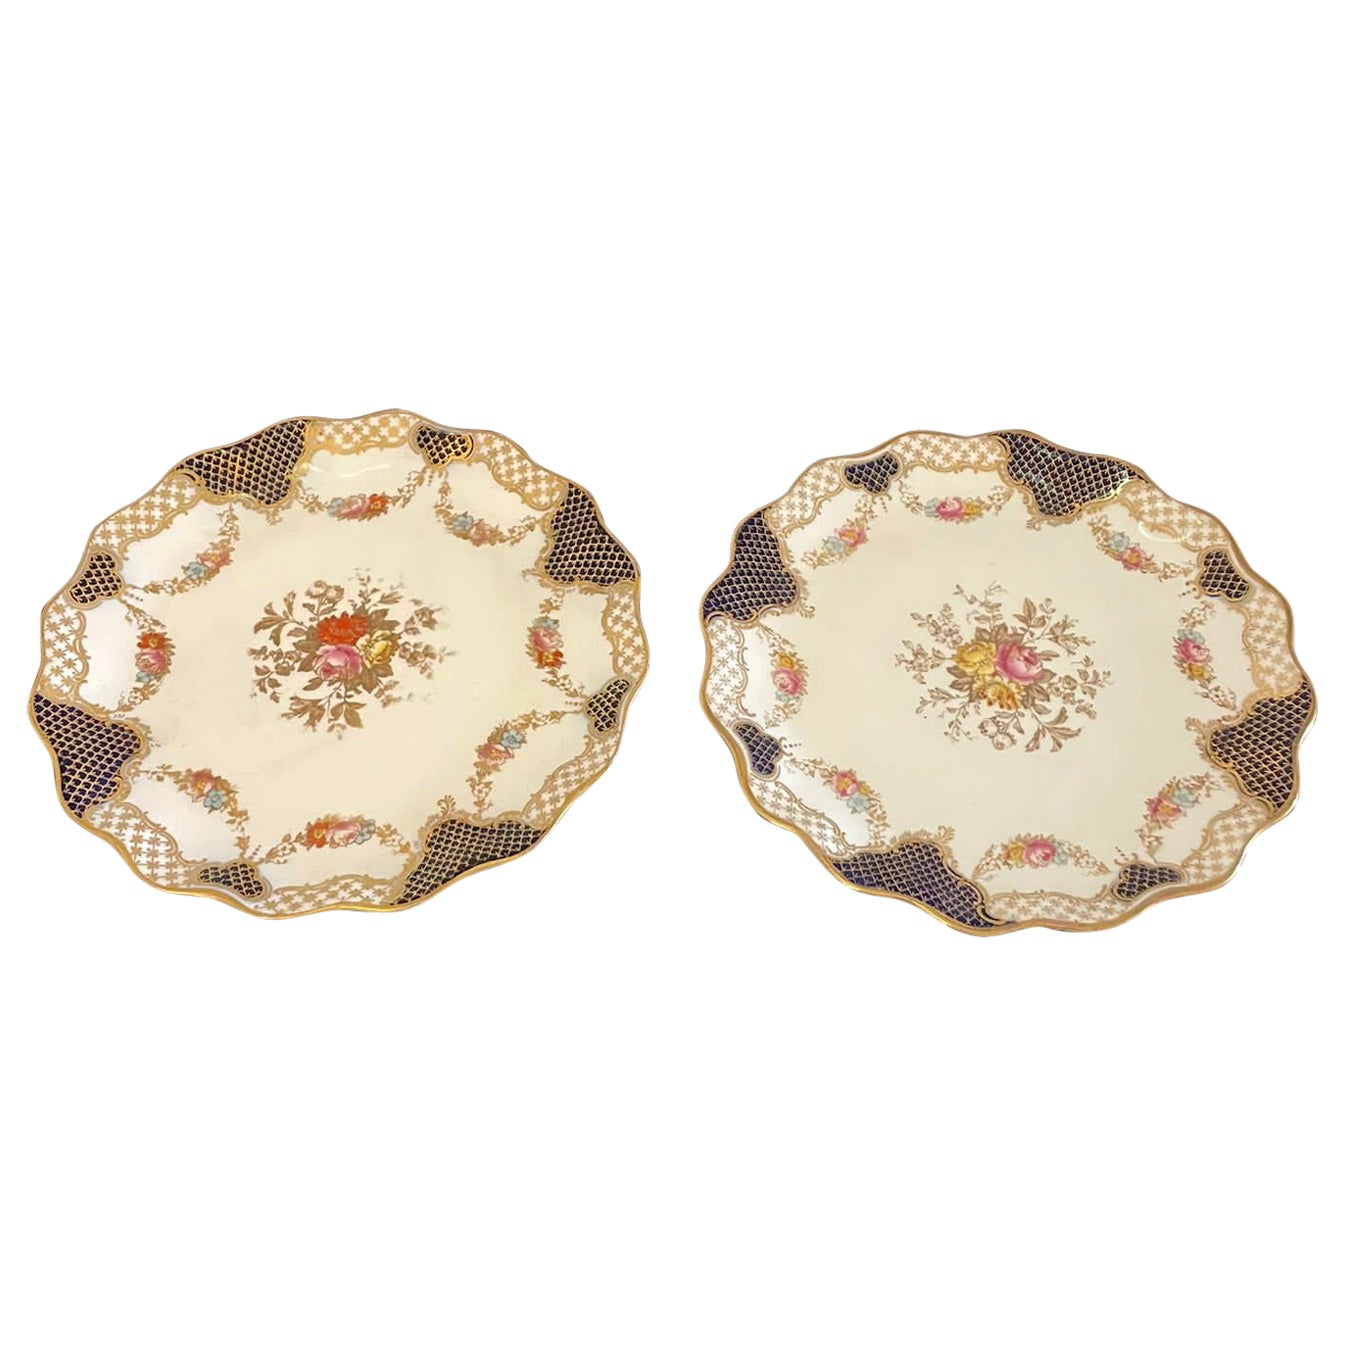 Superb Quality Pair of Antique Edwardian Hand Painted Wedgwood Shaped Plates 